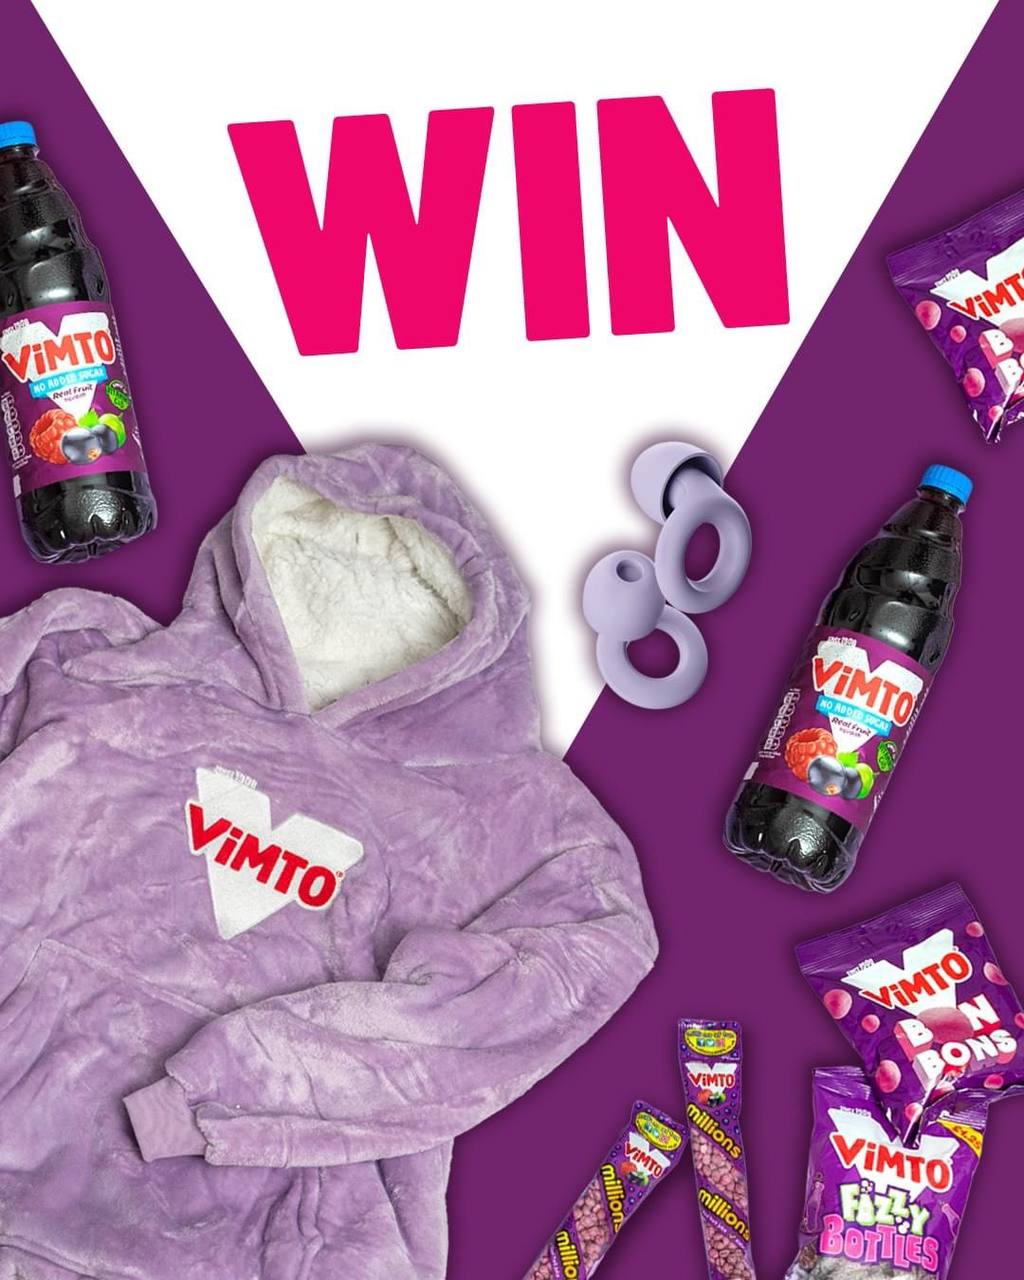 What is Vimto drink